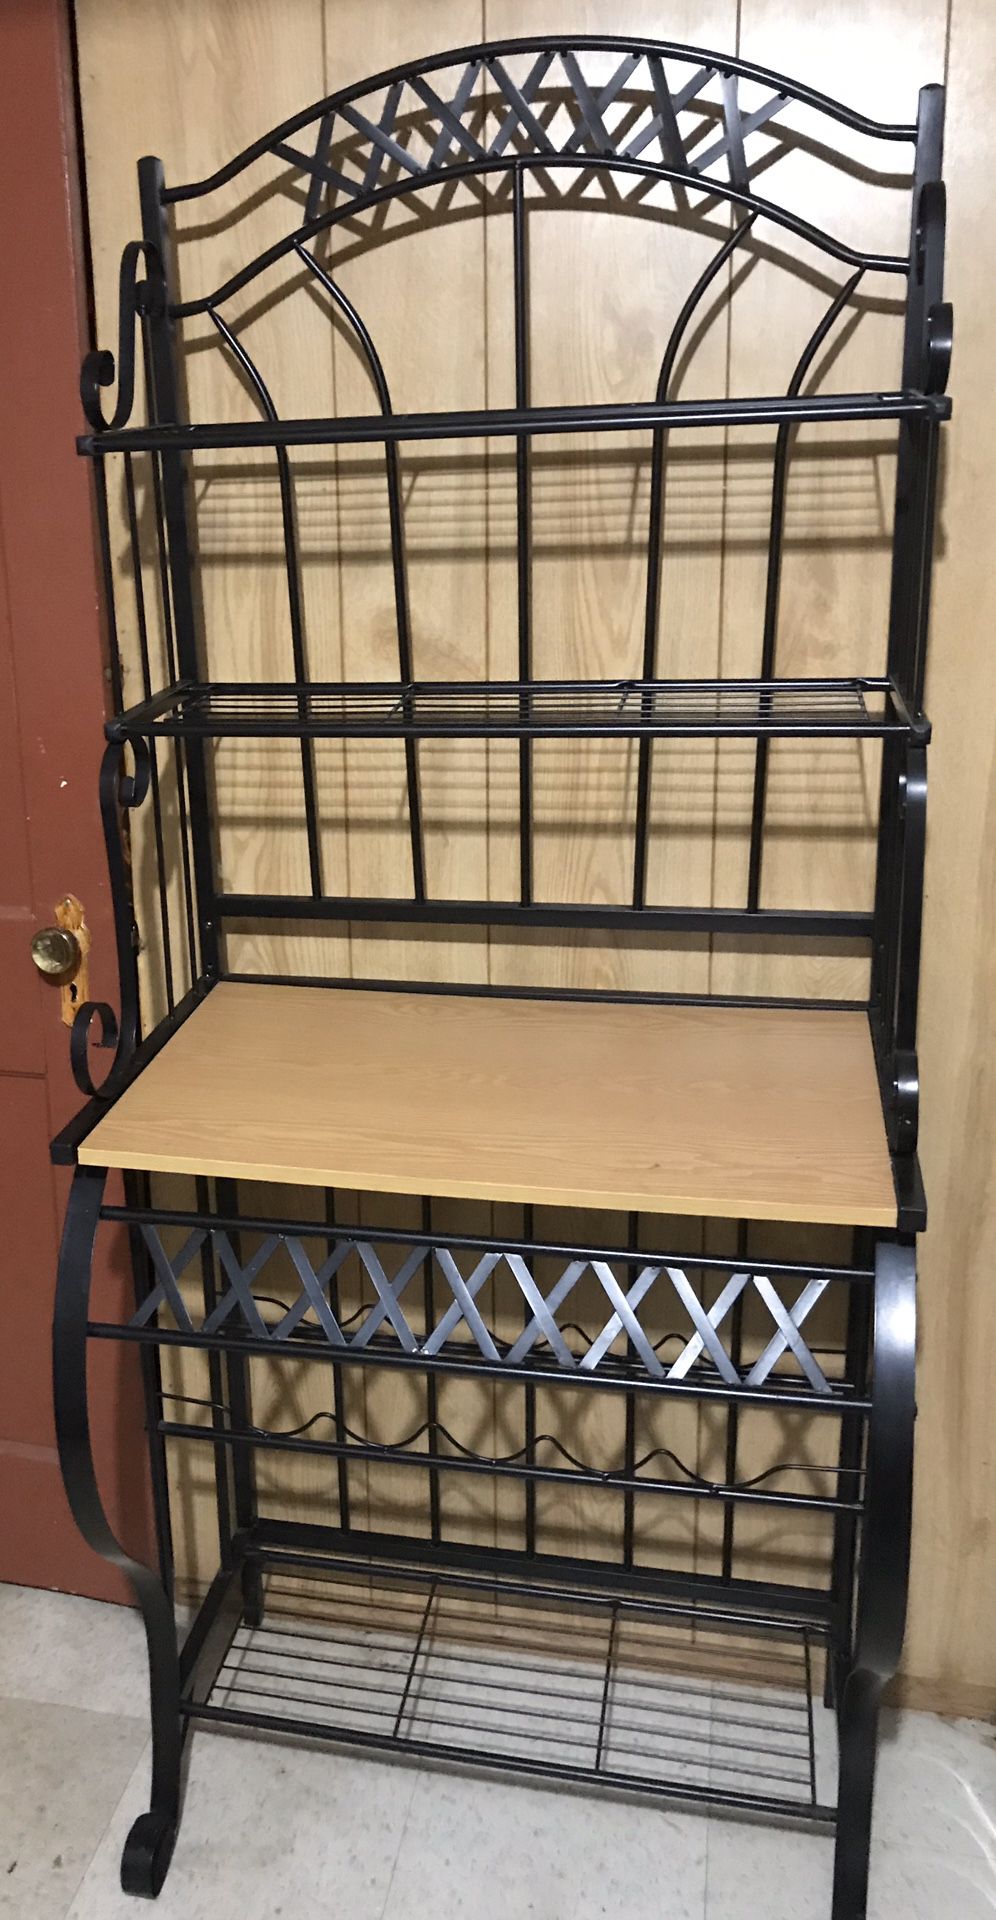 baker rack with wines holders 66” H x 16 1/2” W x 27 1/2” L